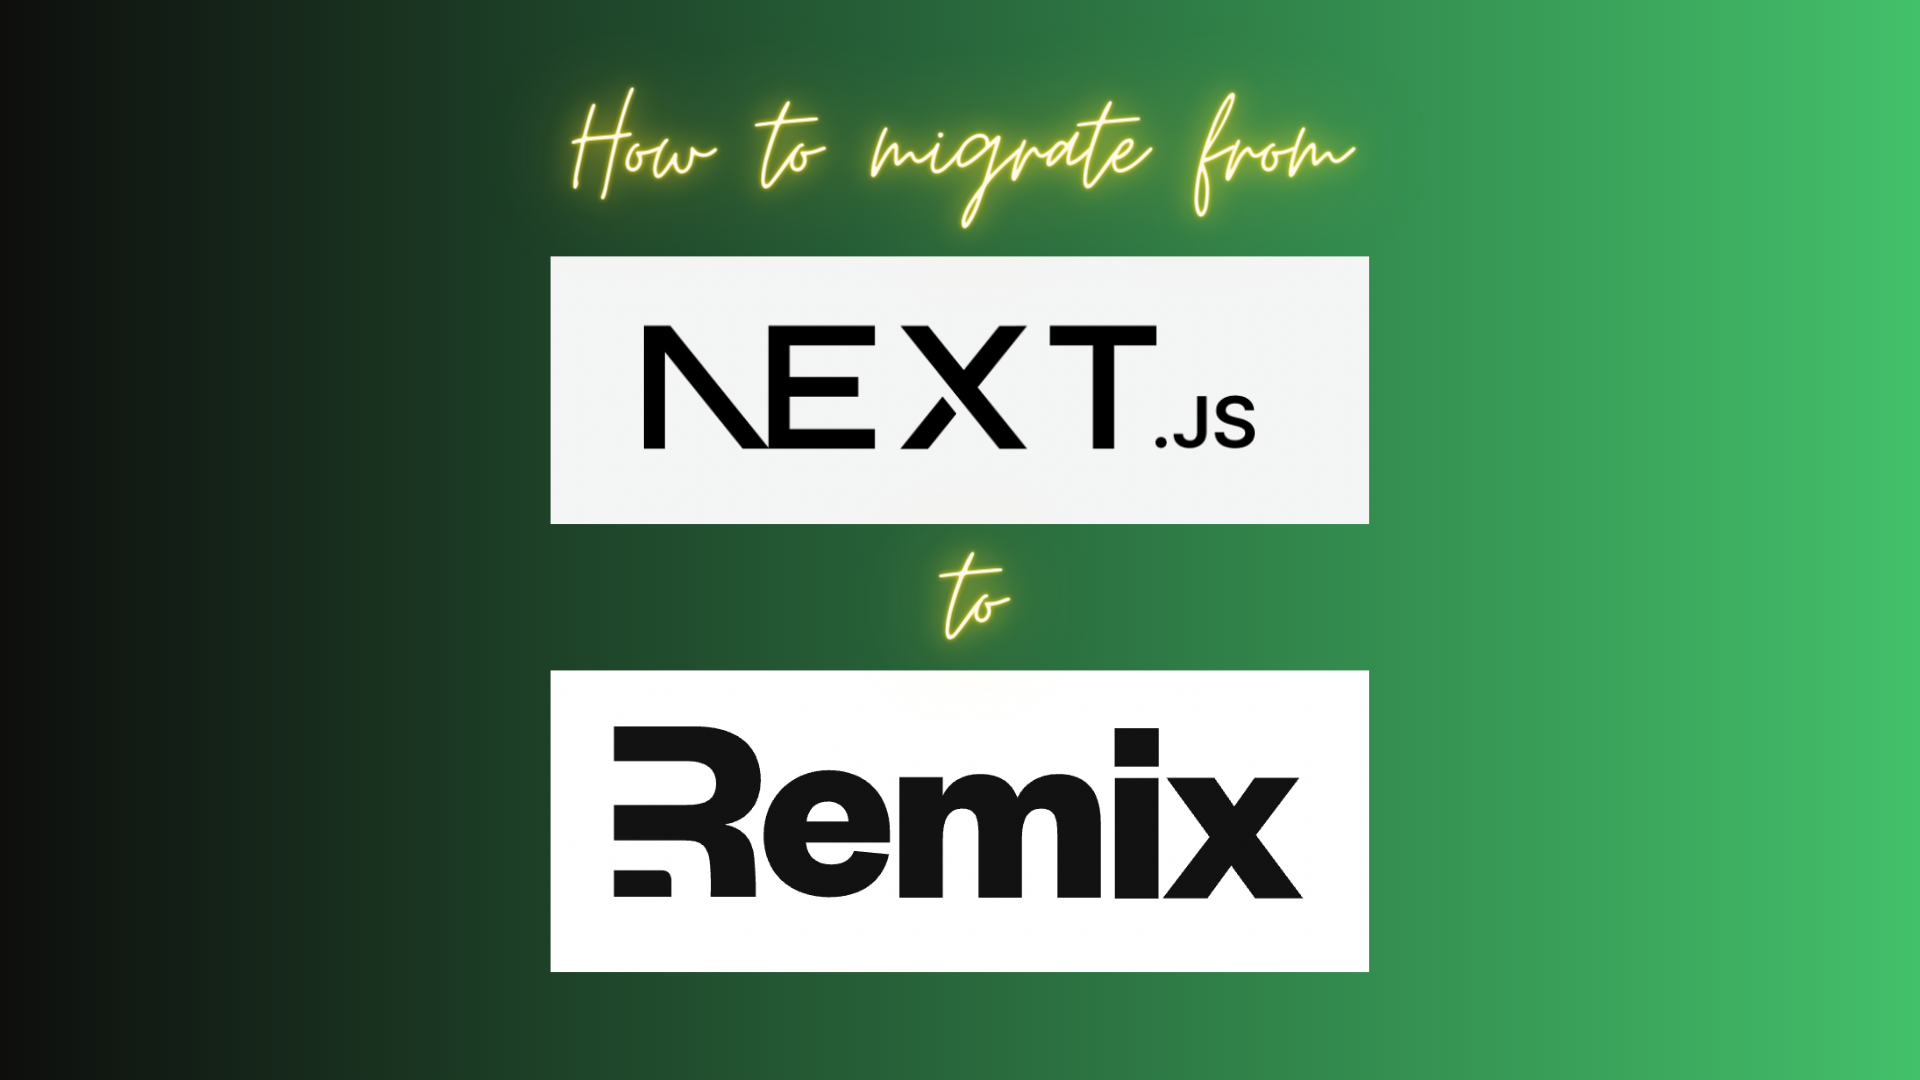 How to migrate from Next.js to Remix with logos, on a blended black and green background. 